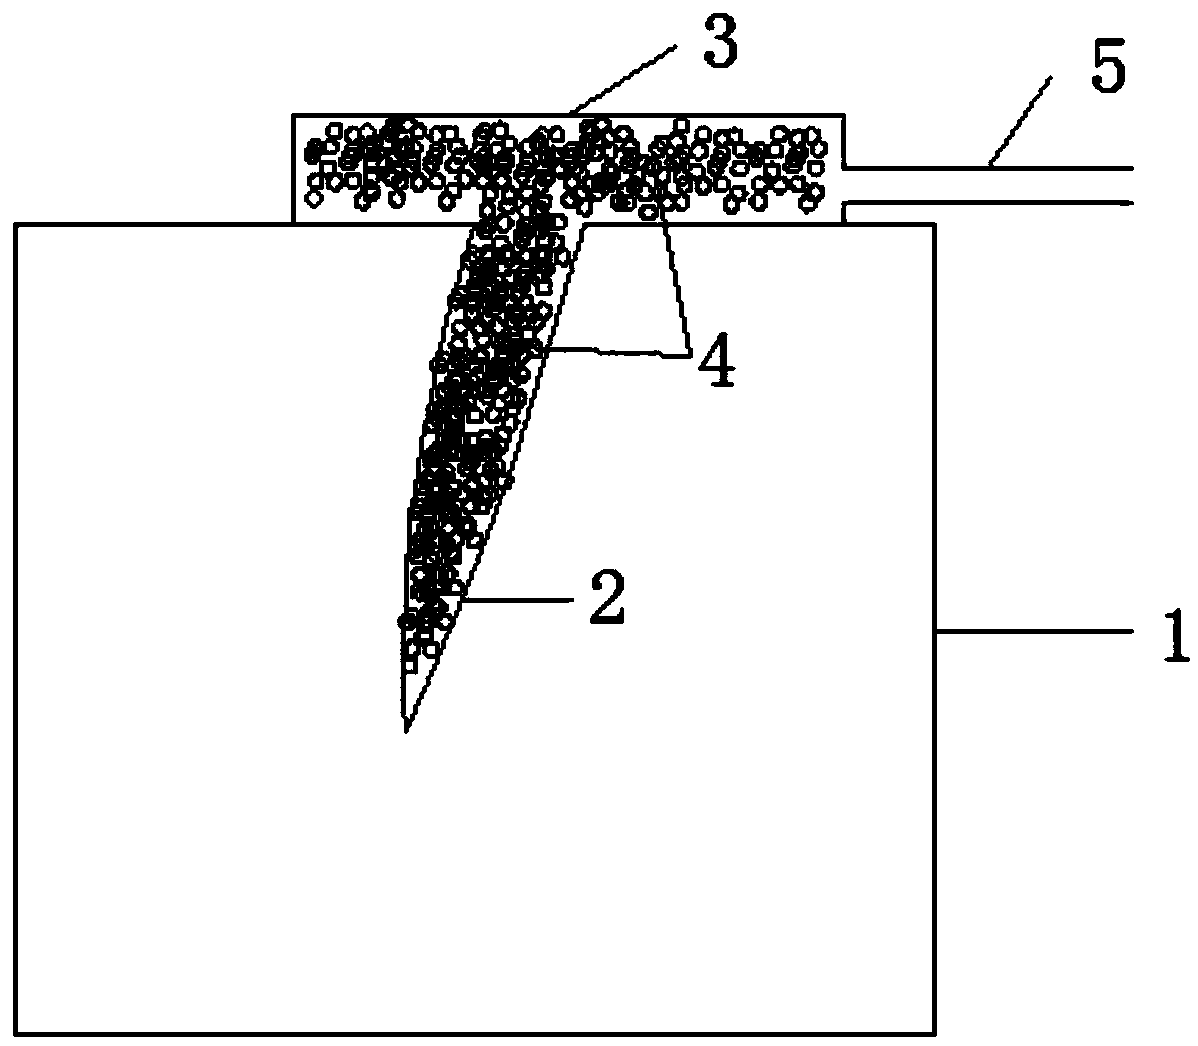 A method for sealing cracks in airport cement concrete pavement